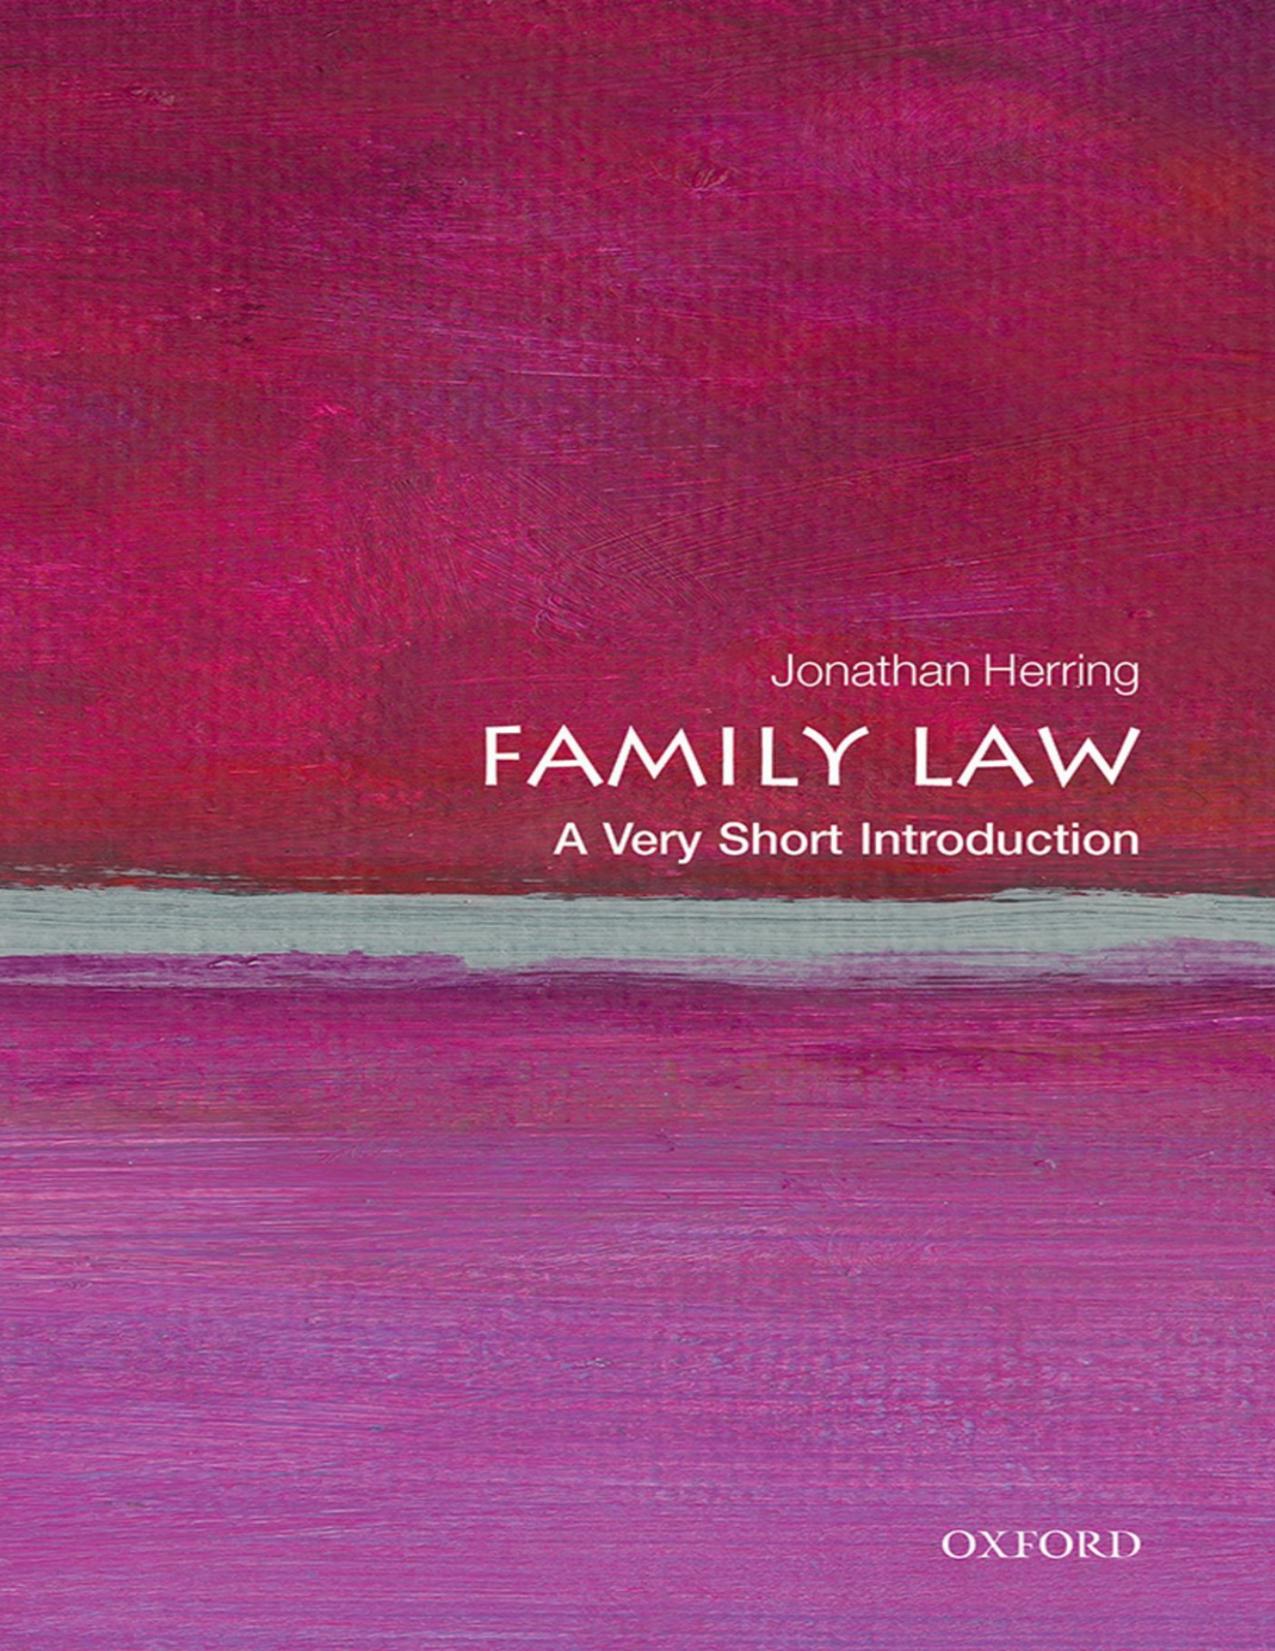 Family Law: A Very Short Introduction - PDFDrive.com